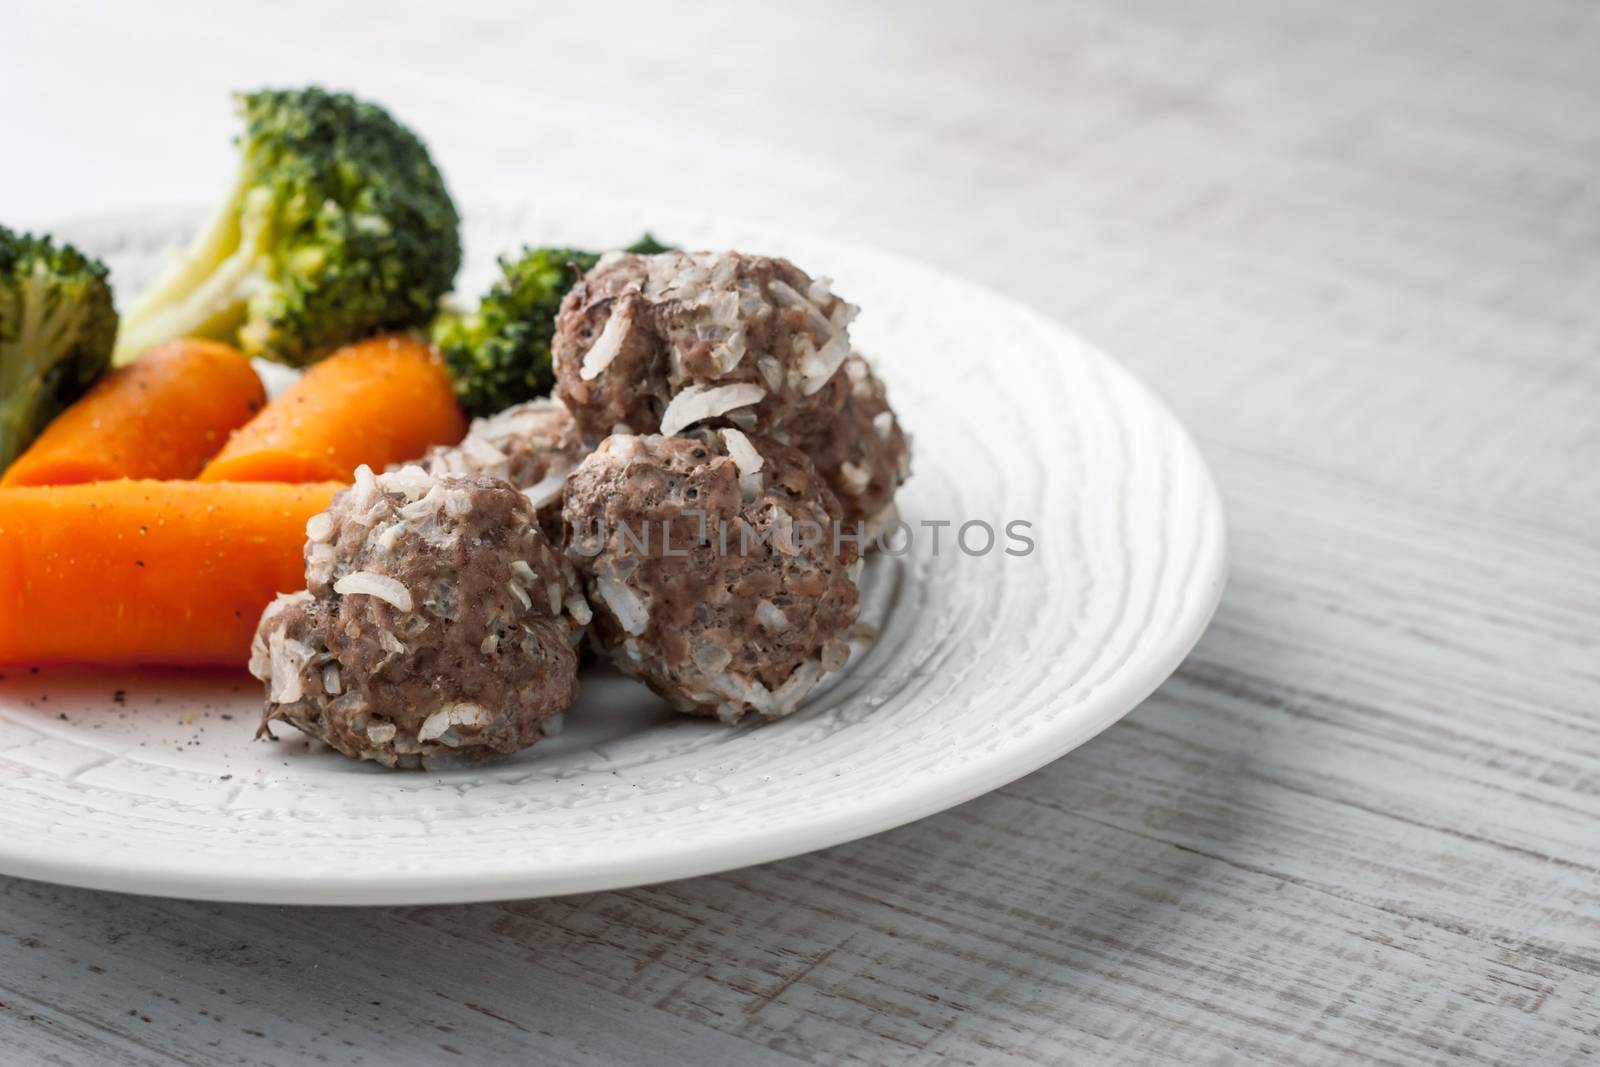 Meatballs with broccoli and carrot



s on the ceramic plate